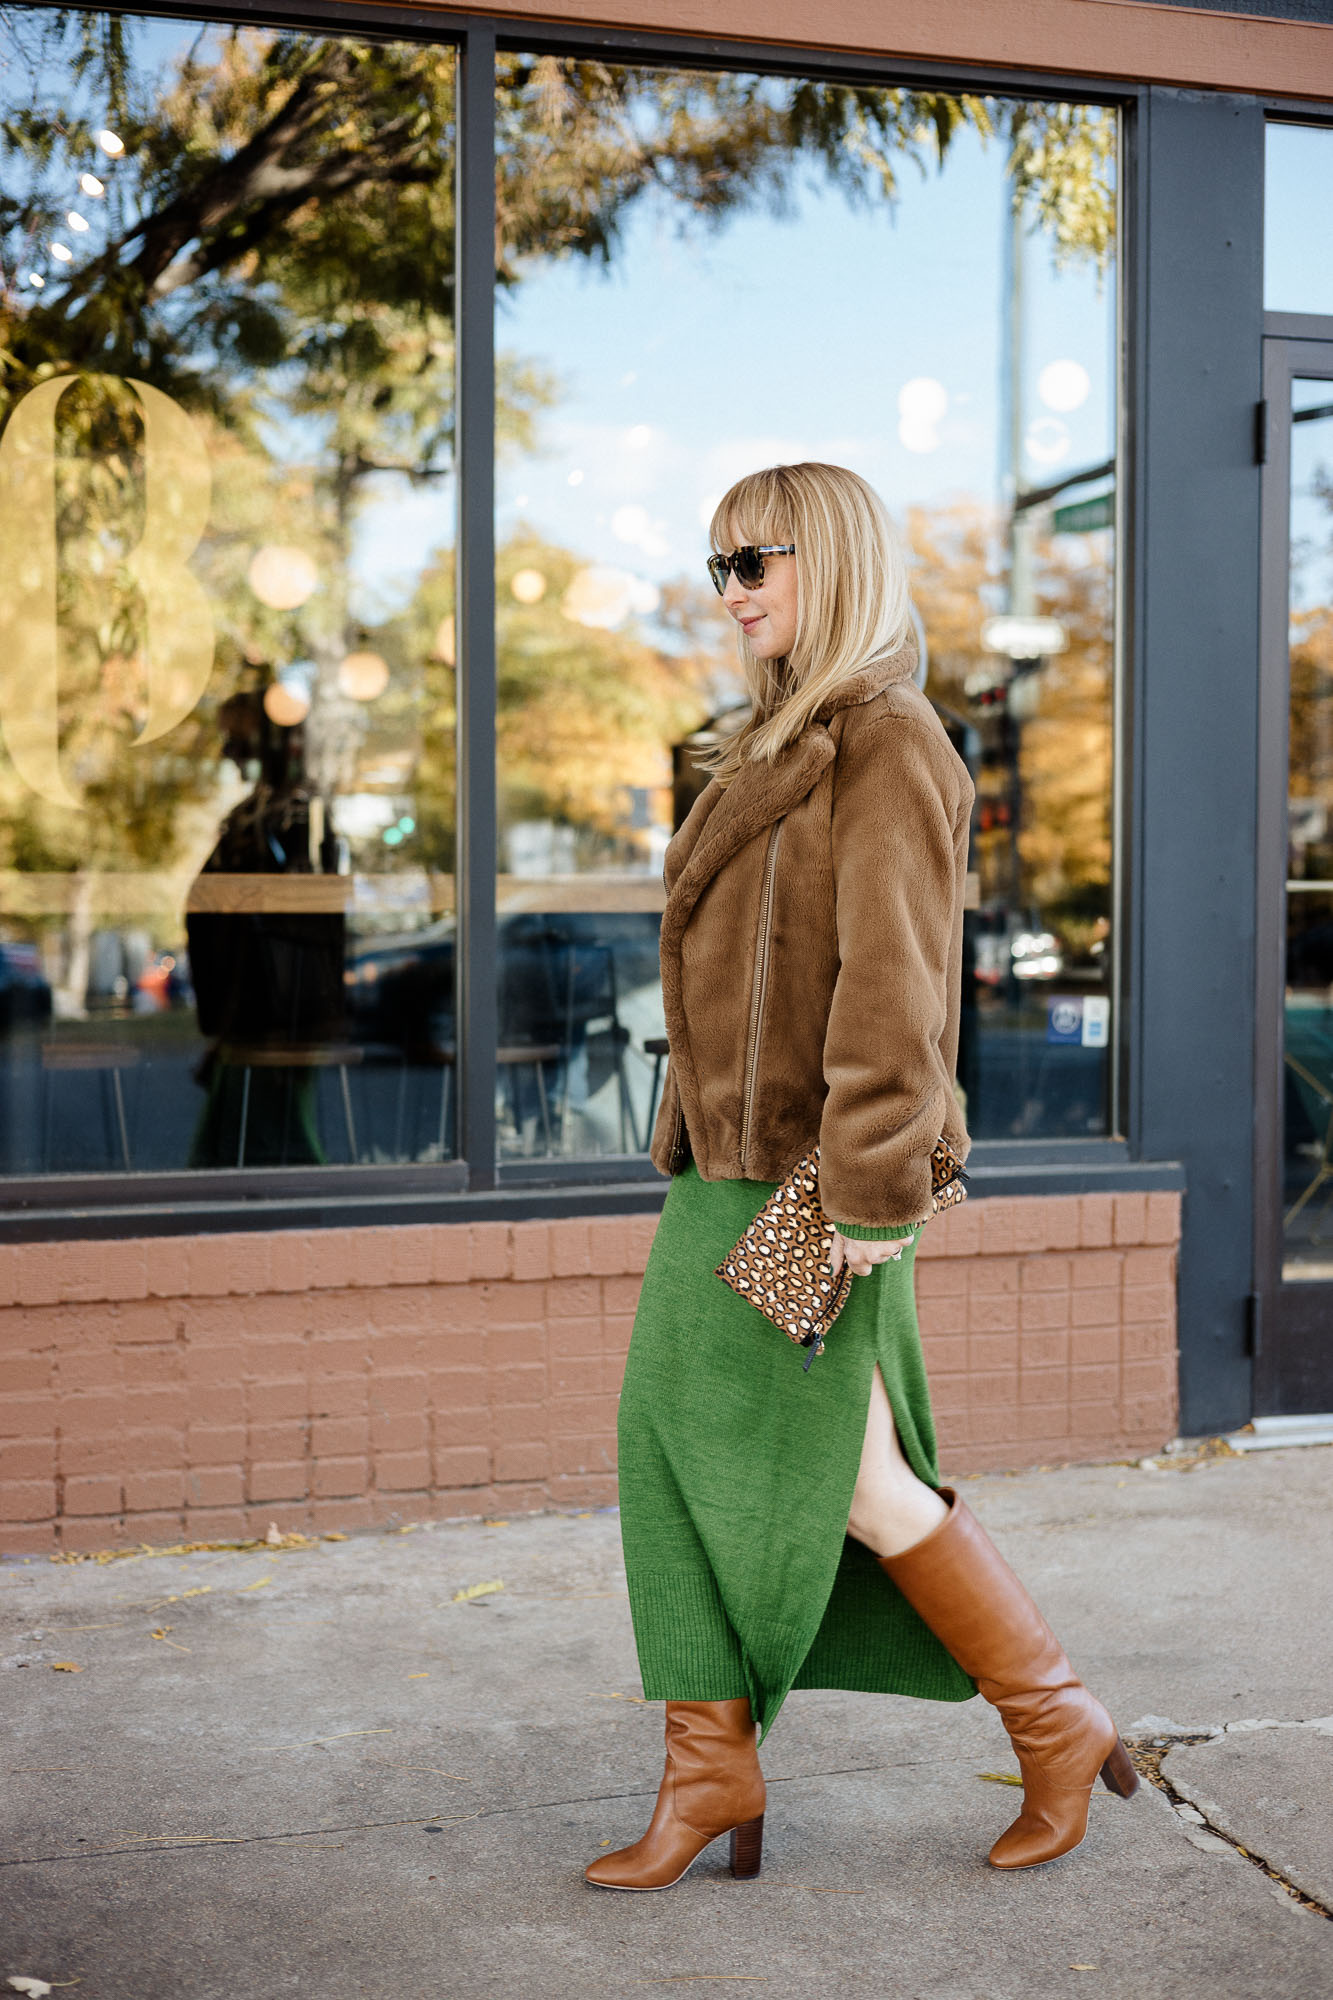 Wearing the Staud crown dress in emerald green with a Vince faux fur coat in brown and Loeffler Randall boots in cognac.